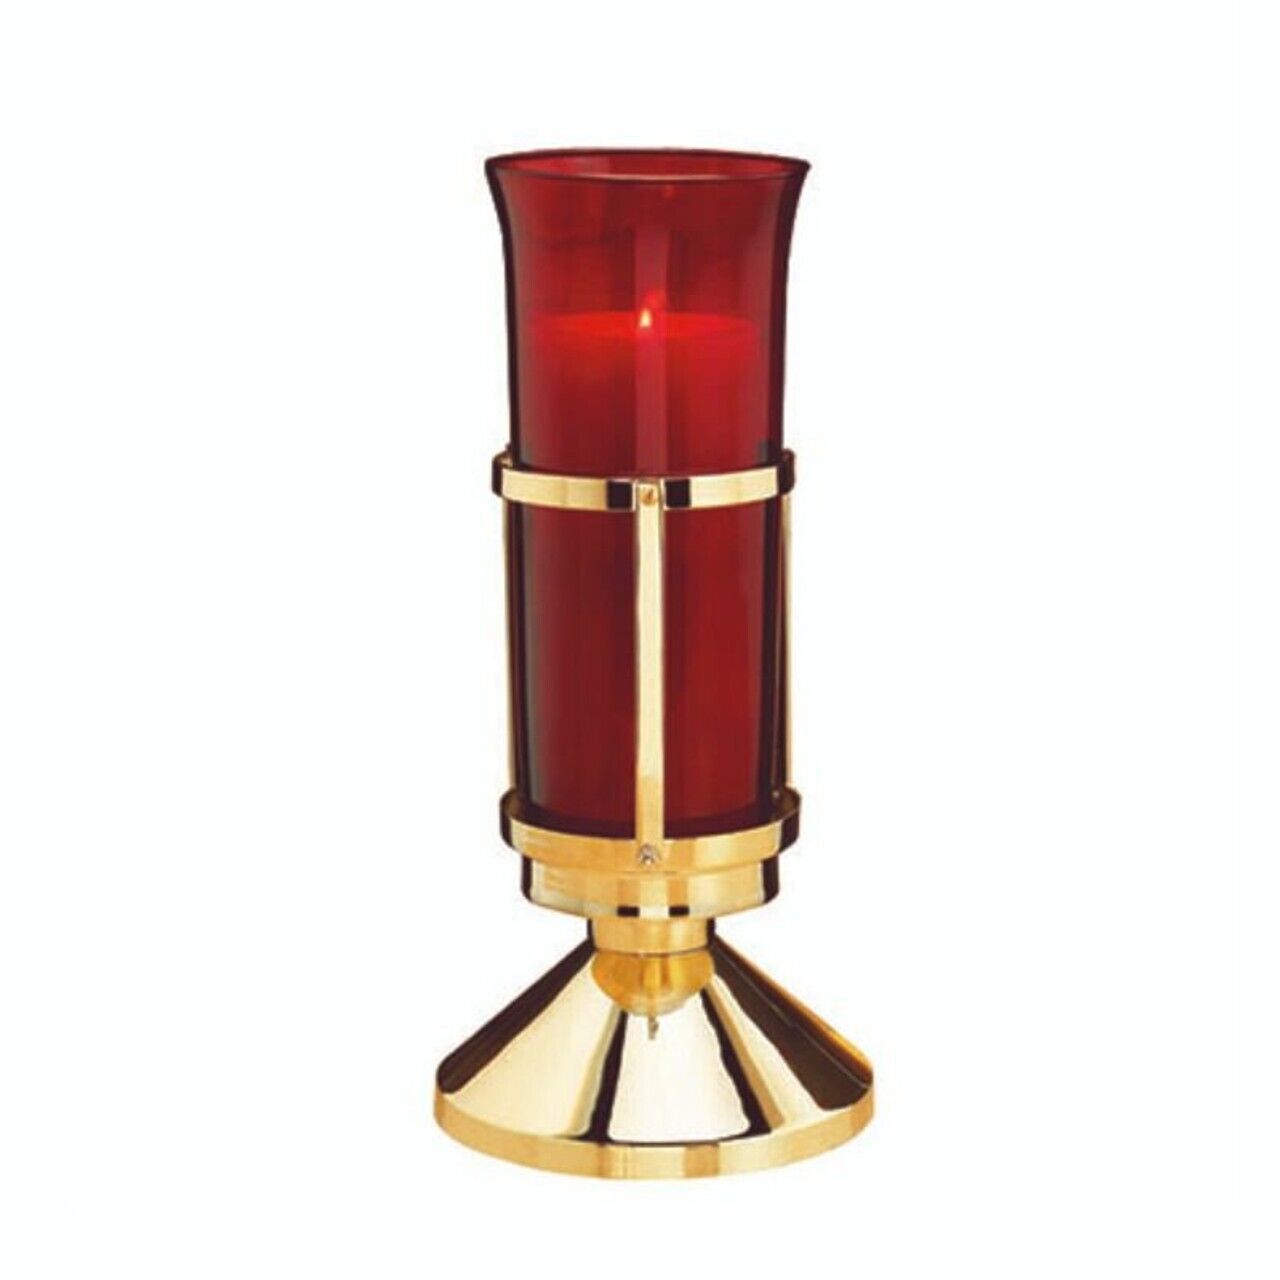 Standing Brass Red Glass Sanctuary Light Holder for Church or Sanctuary 13 In